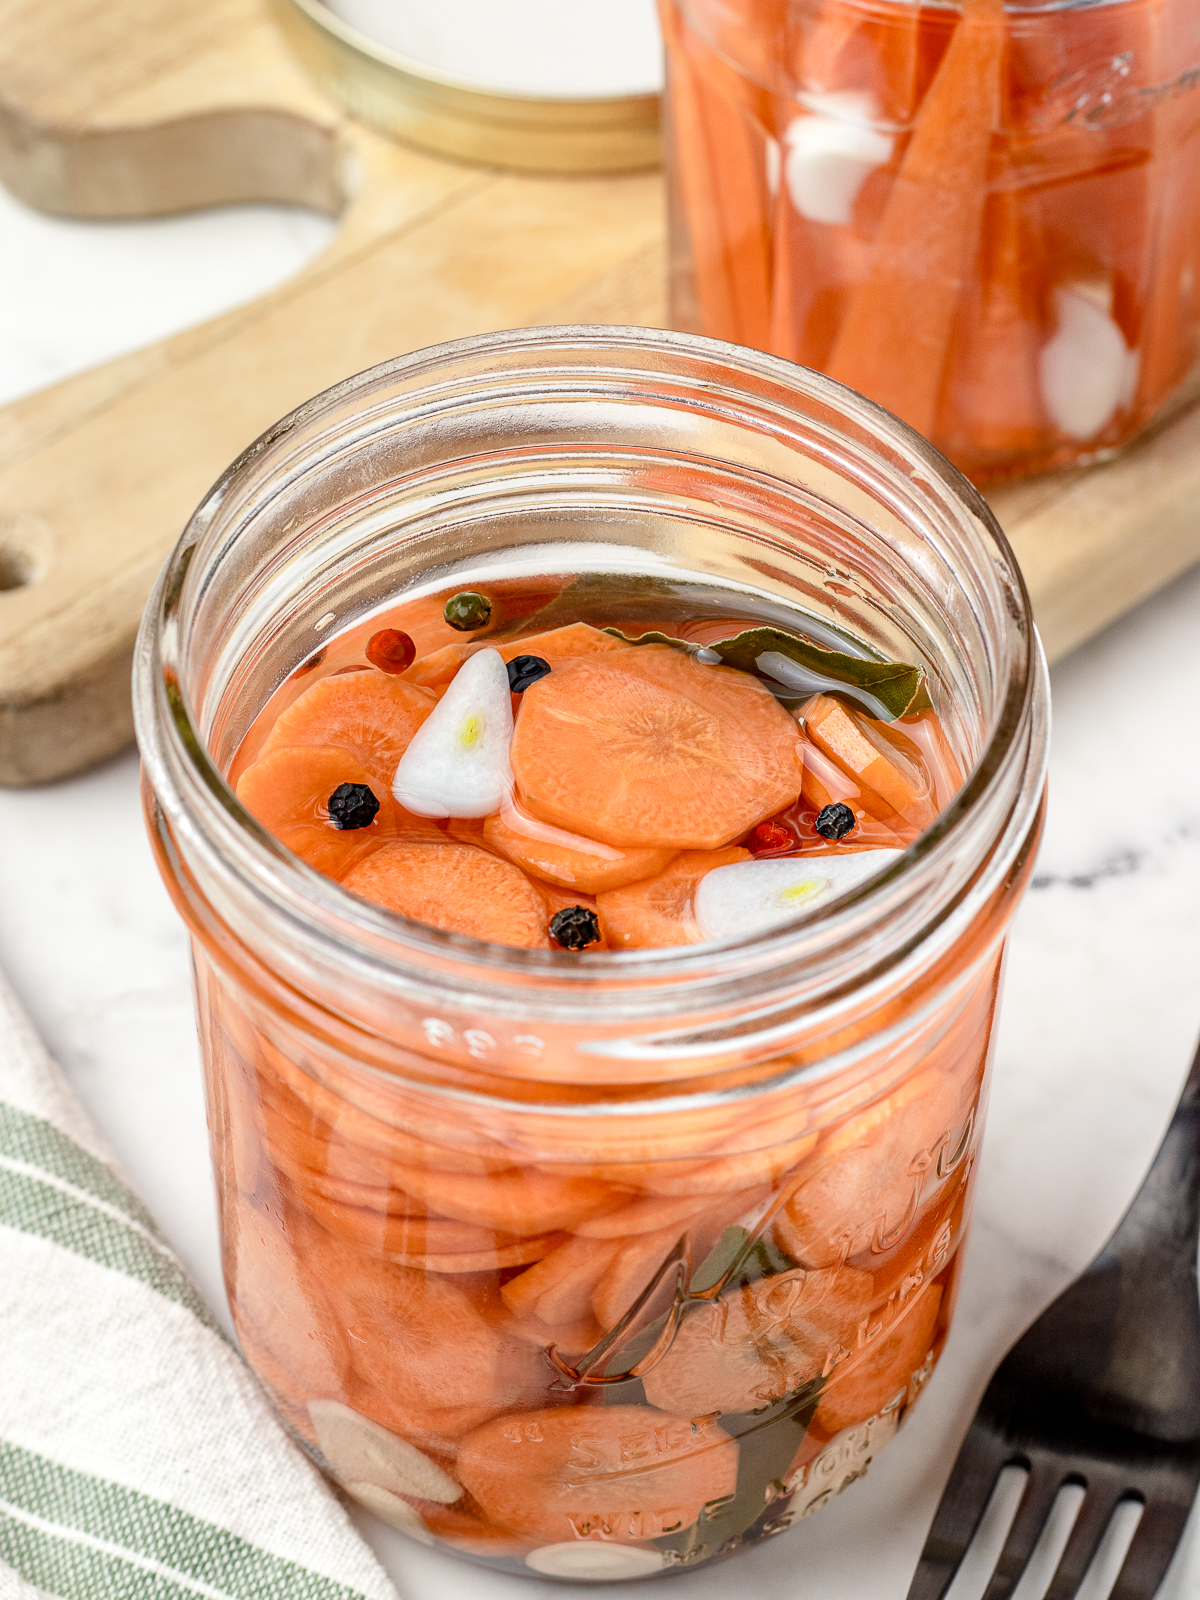 Jar of quick pickled carrots with fork on the side for eating.